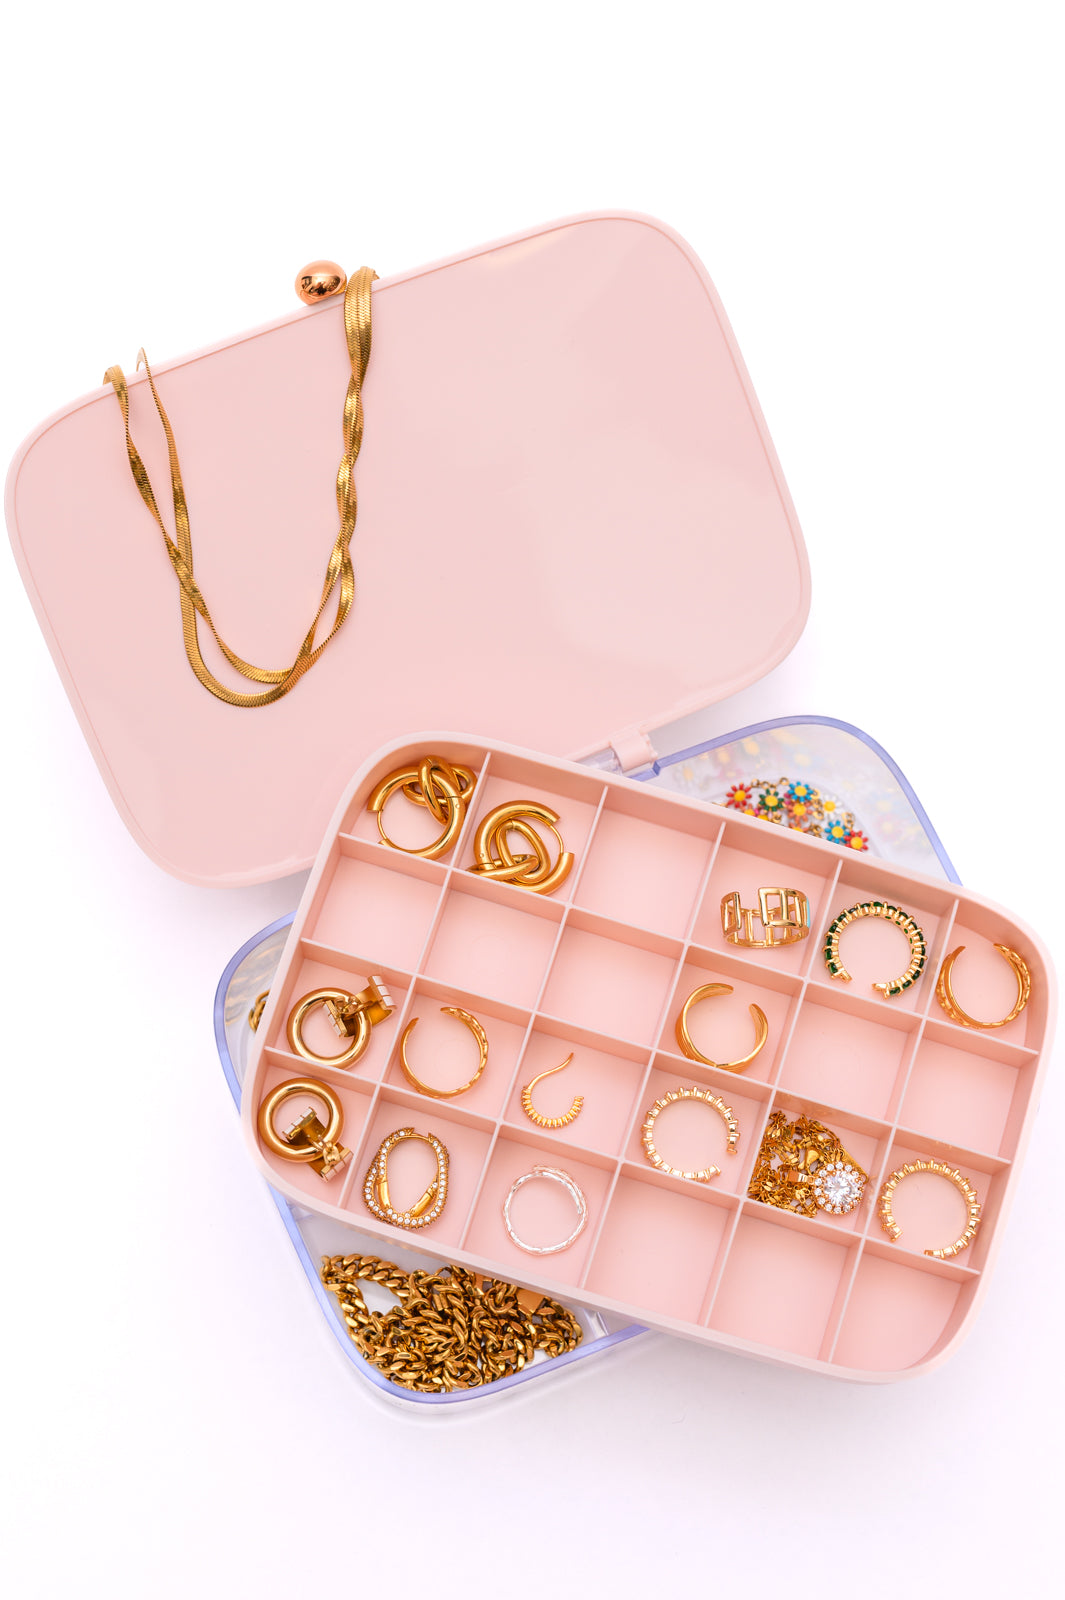 All Sorted Out Jewelry Storage Case in Pink - Southern Soul Collectives